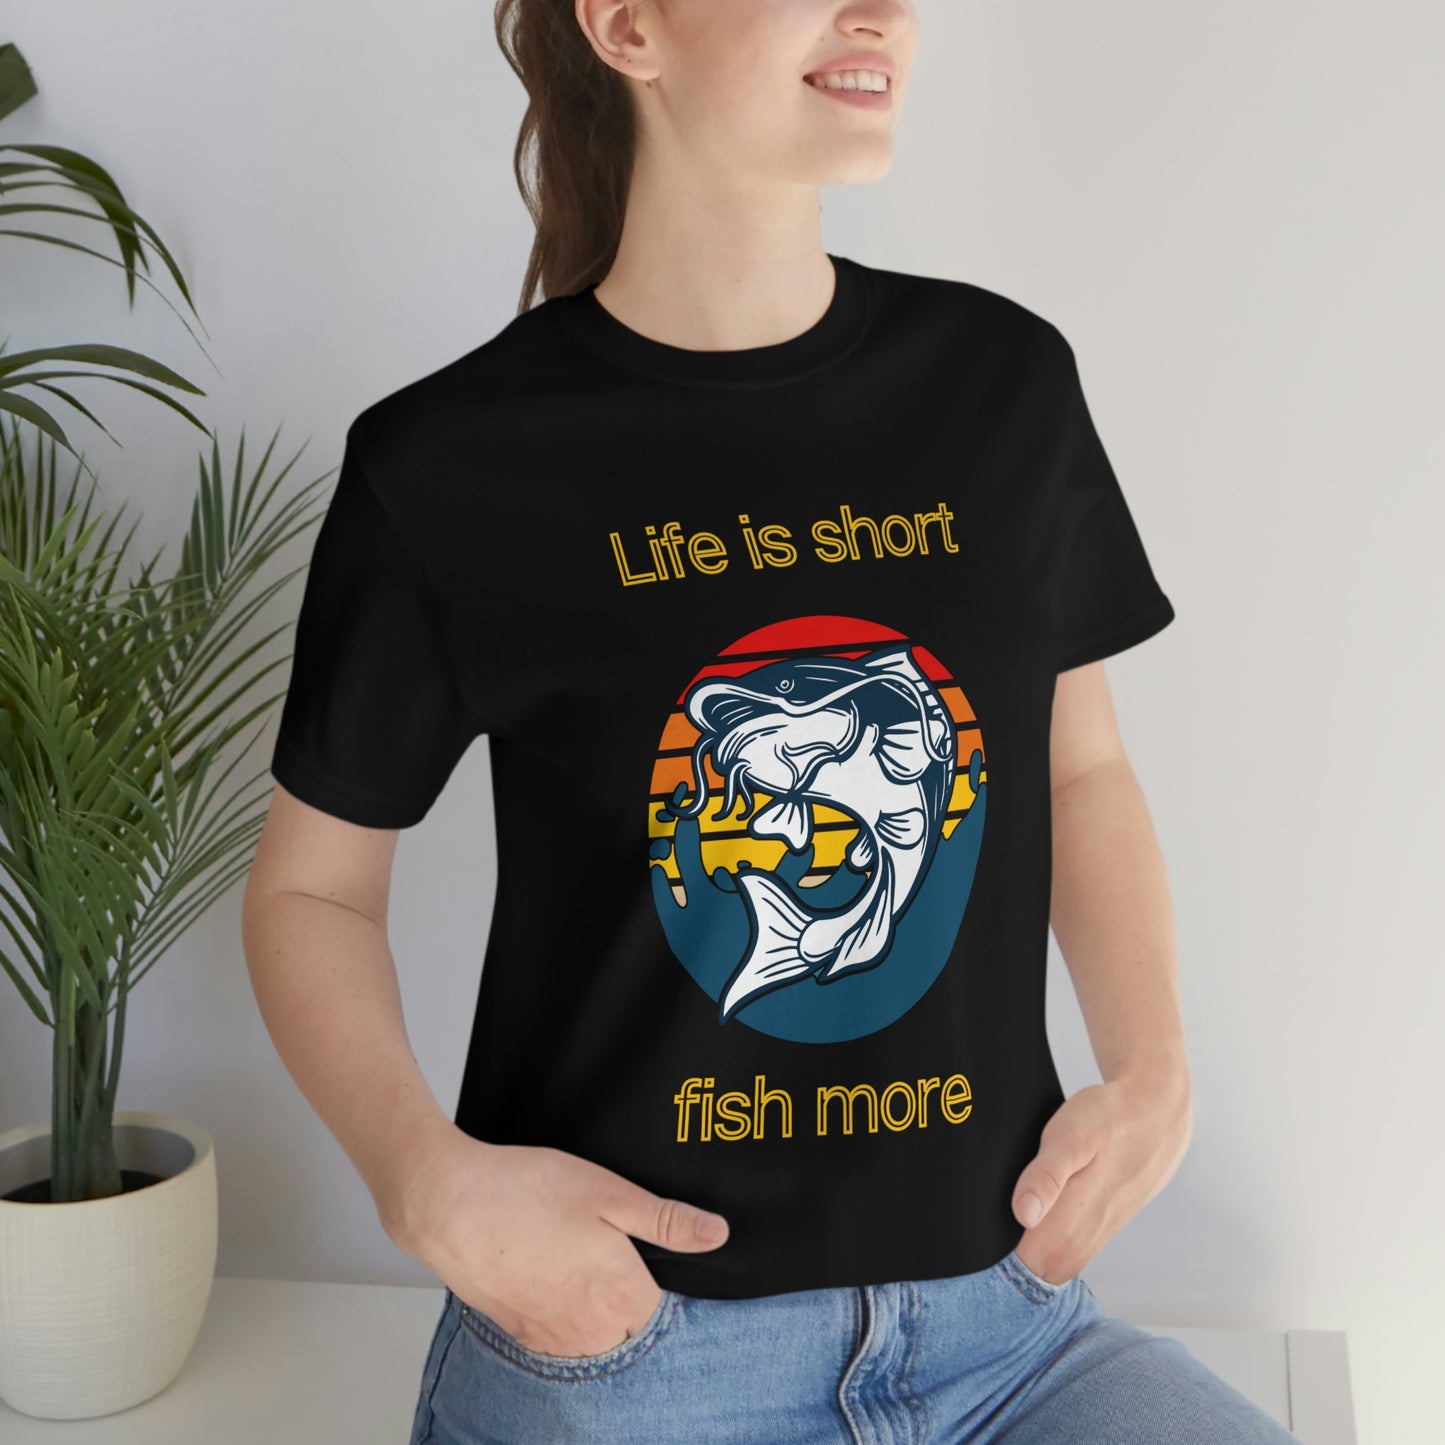 Fishing Style, Life is short, fish more,  Short Sleeve Tee